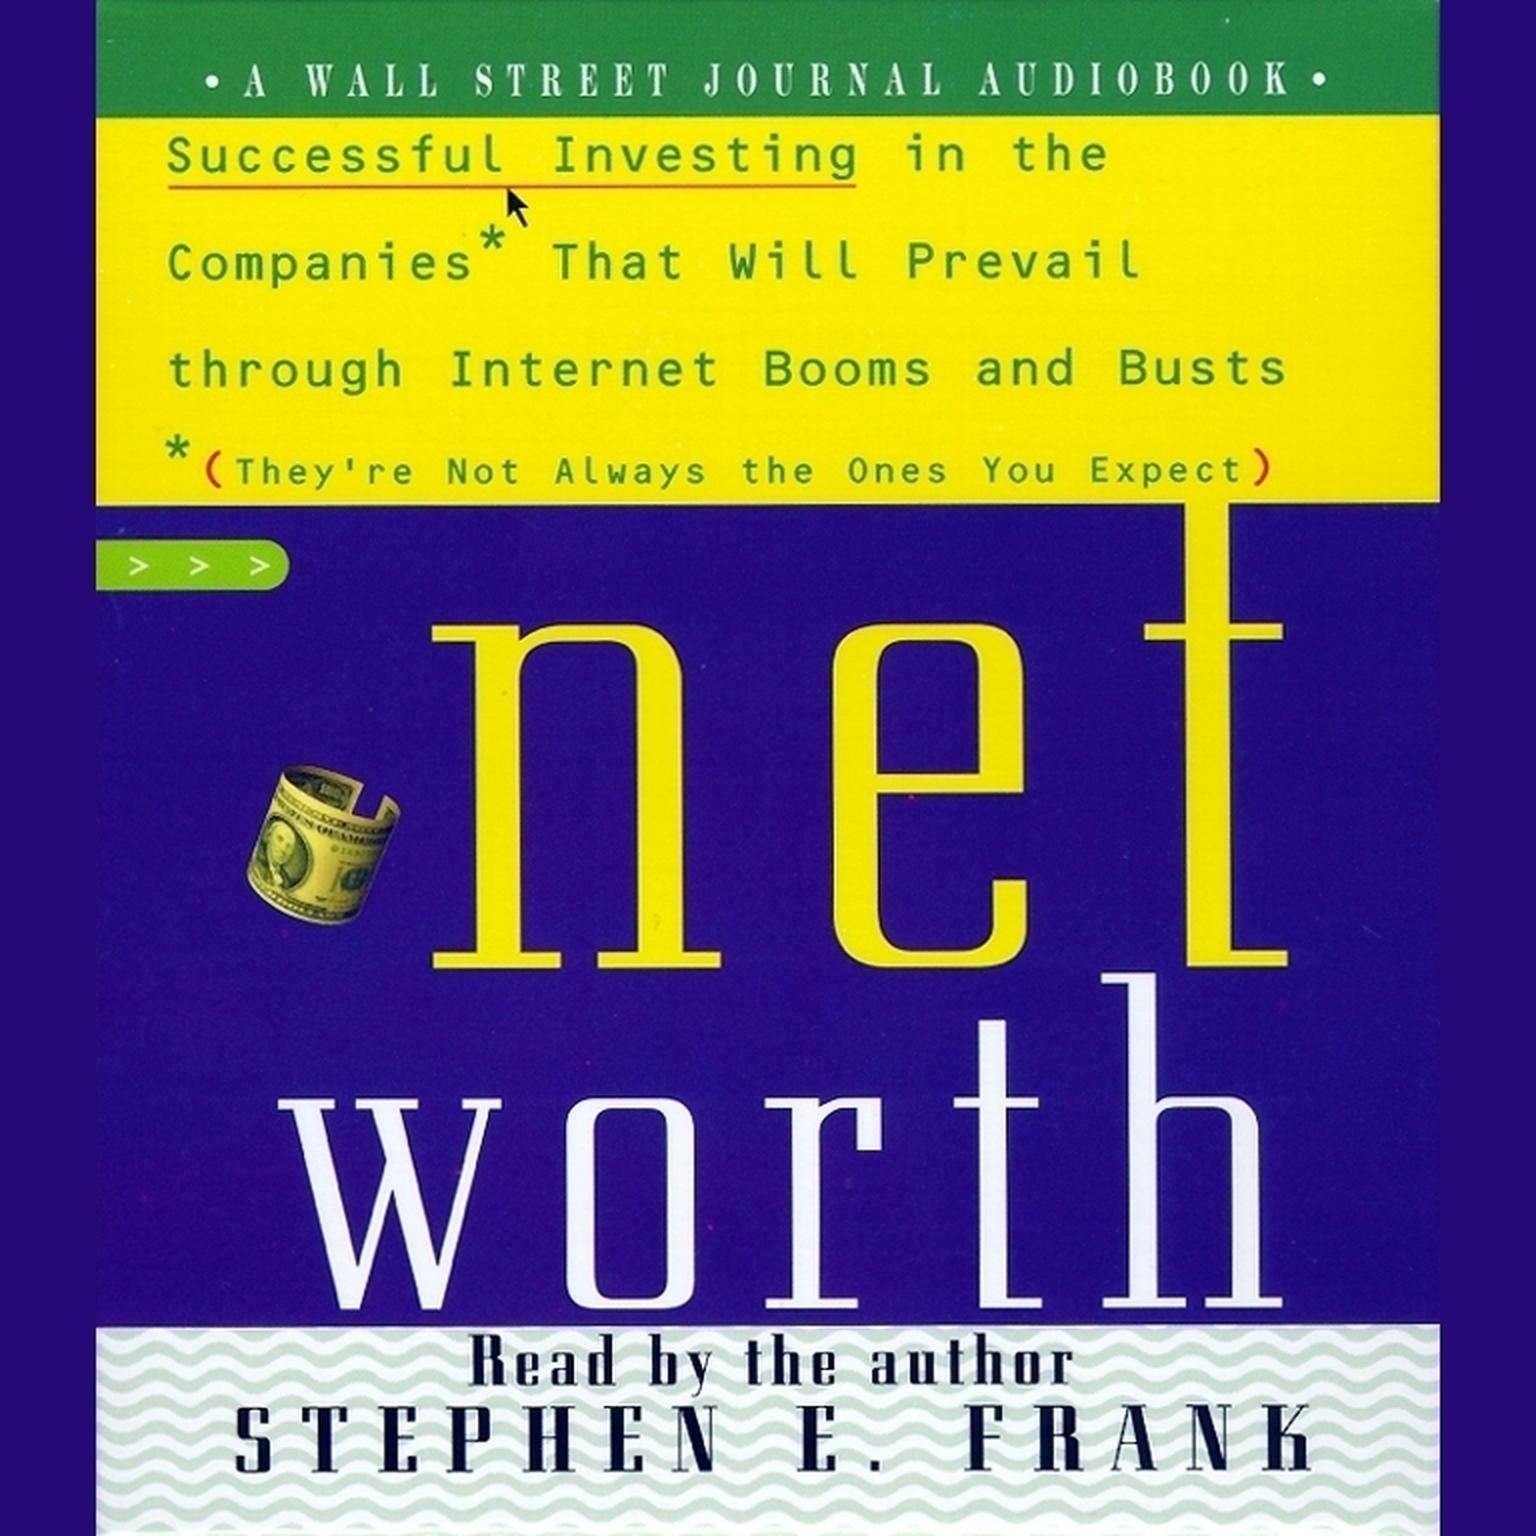 Networth (Abridged): Successful Investing in the Companies That Will Prevail Through Internet Booms and Busts (Theyre Not Always the Ones You Expect) Audiobook, by Stephen E. Frank